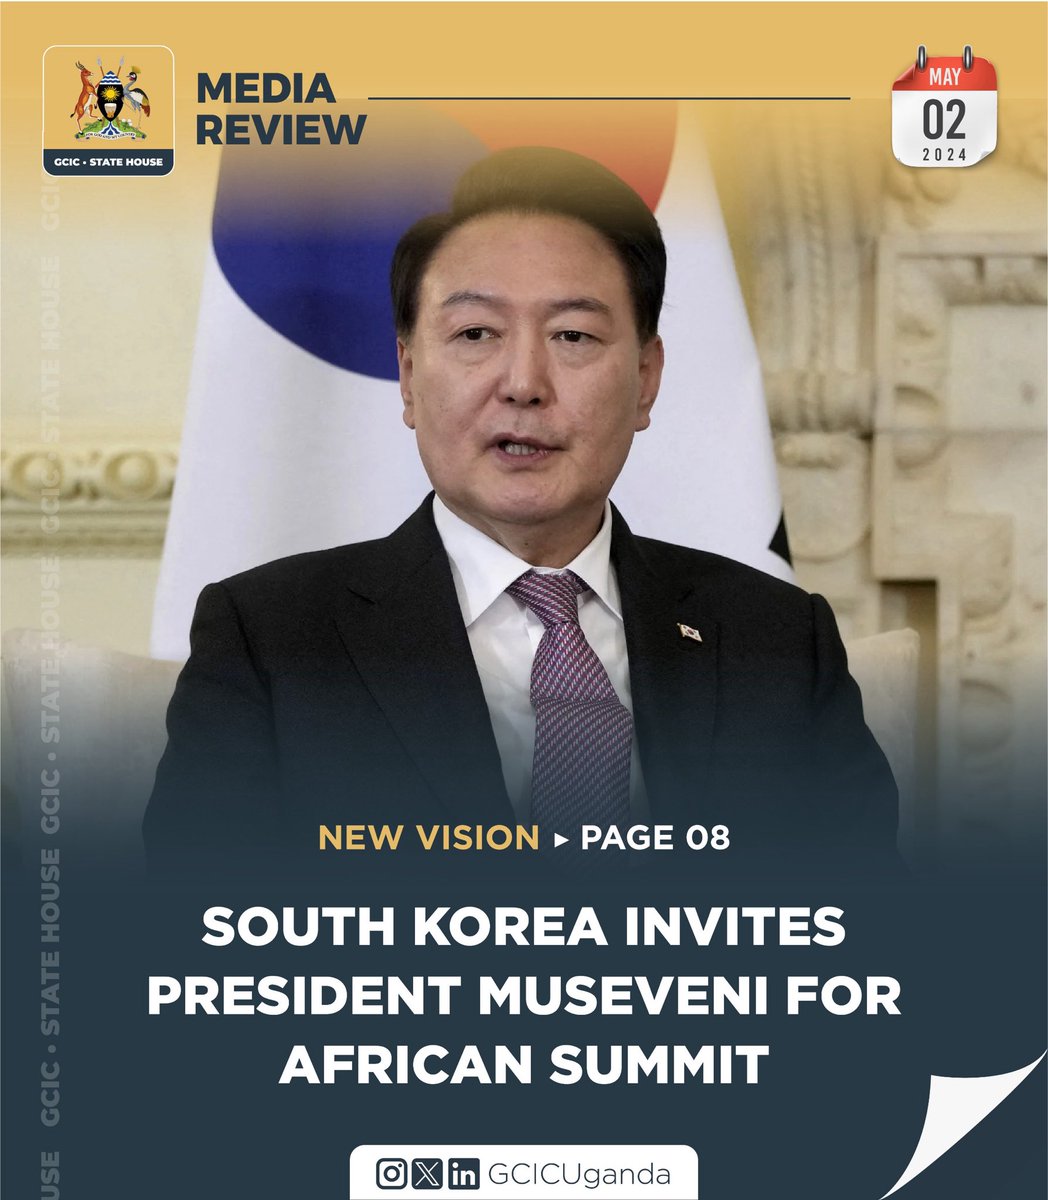 The President of South Korea, Yoon Suk Yeol has invited President Museveni for the inaugural Korea-Africa summit next month from 4th to 5th June, 2024 at Kintex in Seoul, the Capital City of South Korea. 
#GCICMediaReview #OpenGovUg